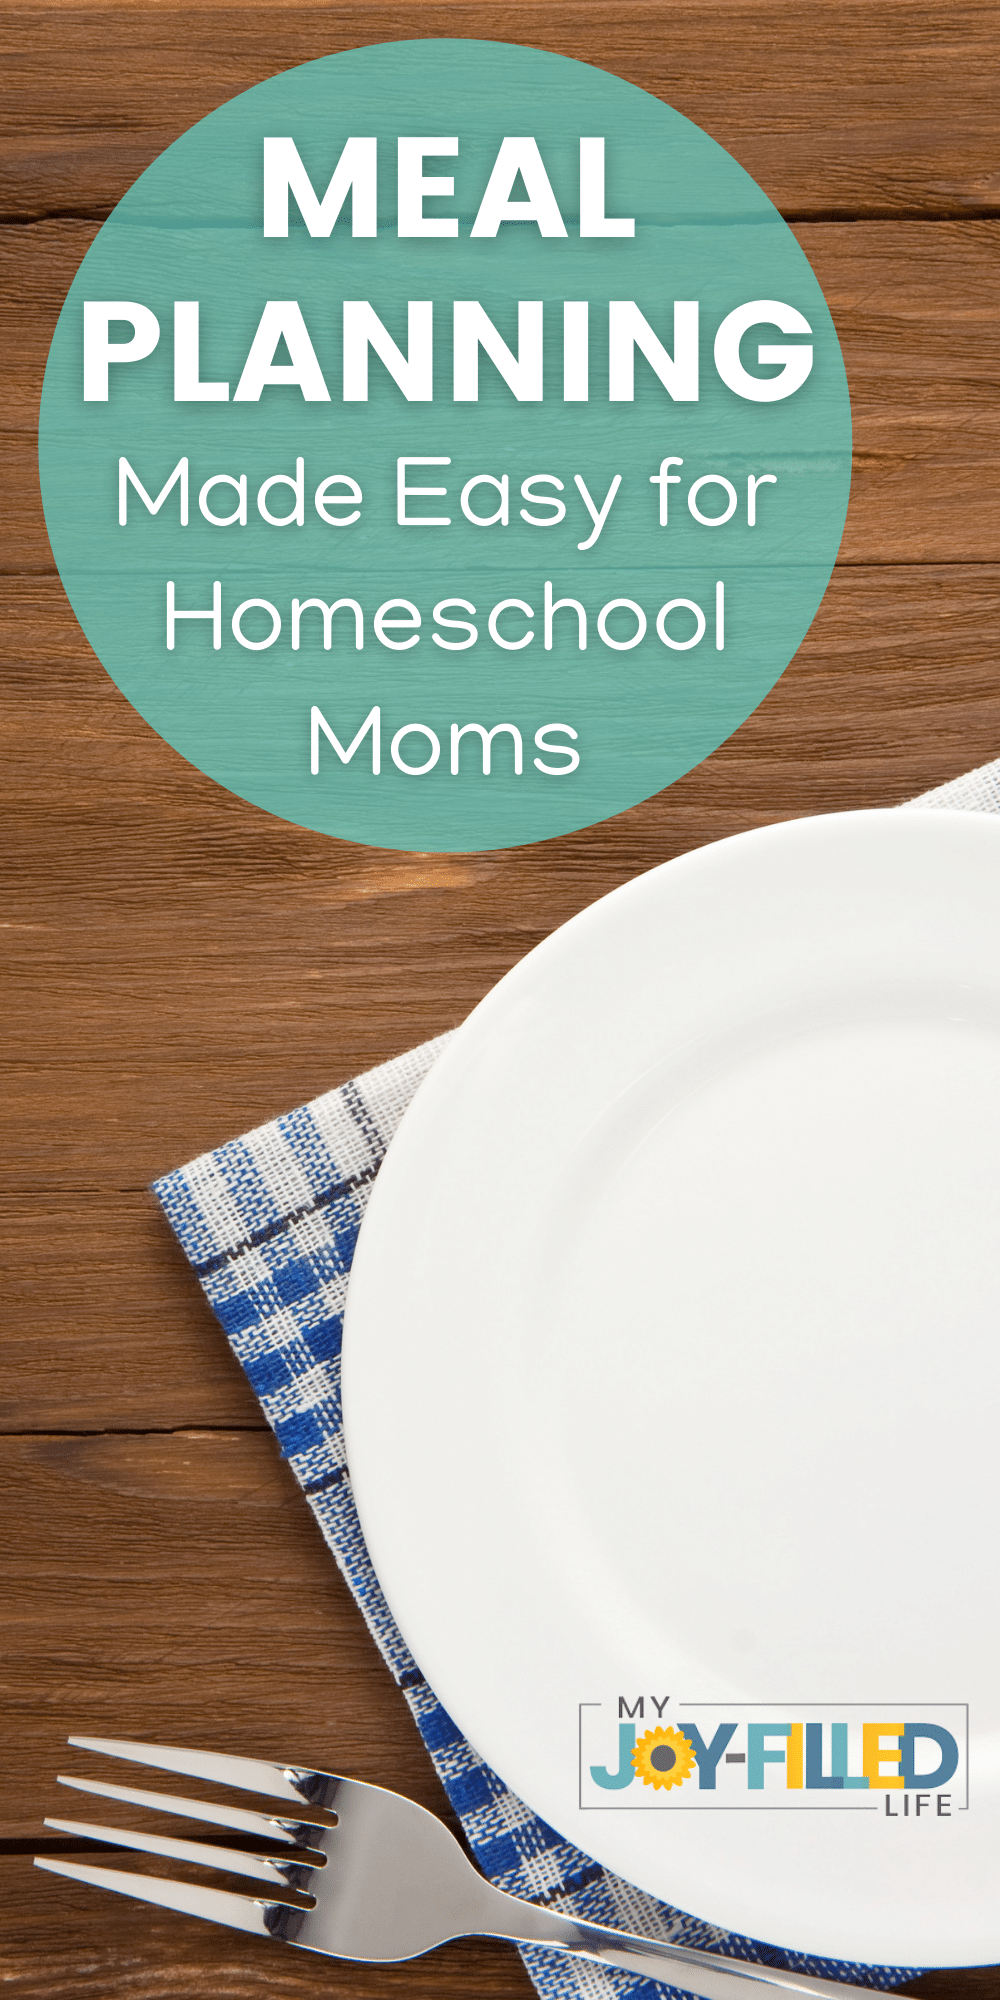 meal-planning-for-homeschool-moms-my-joy-filled-life